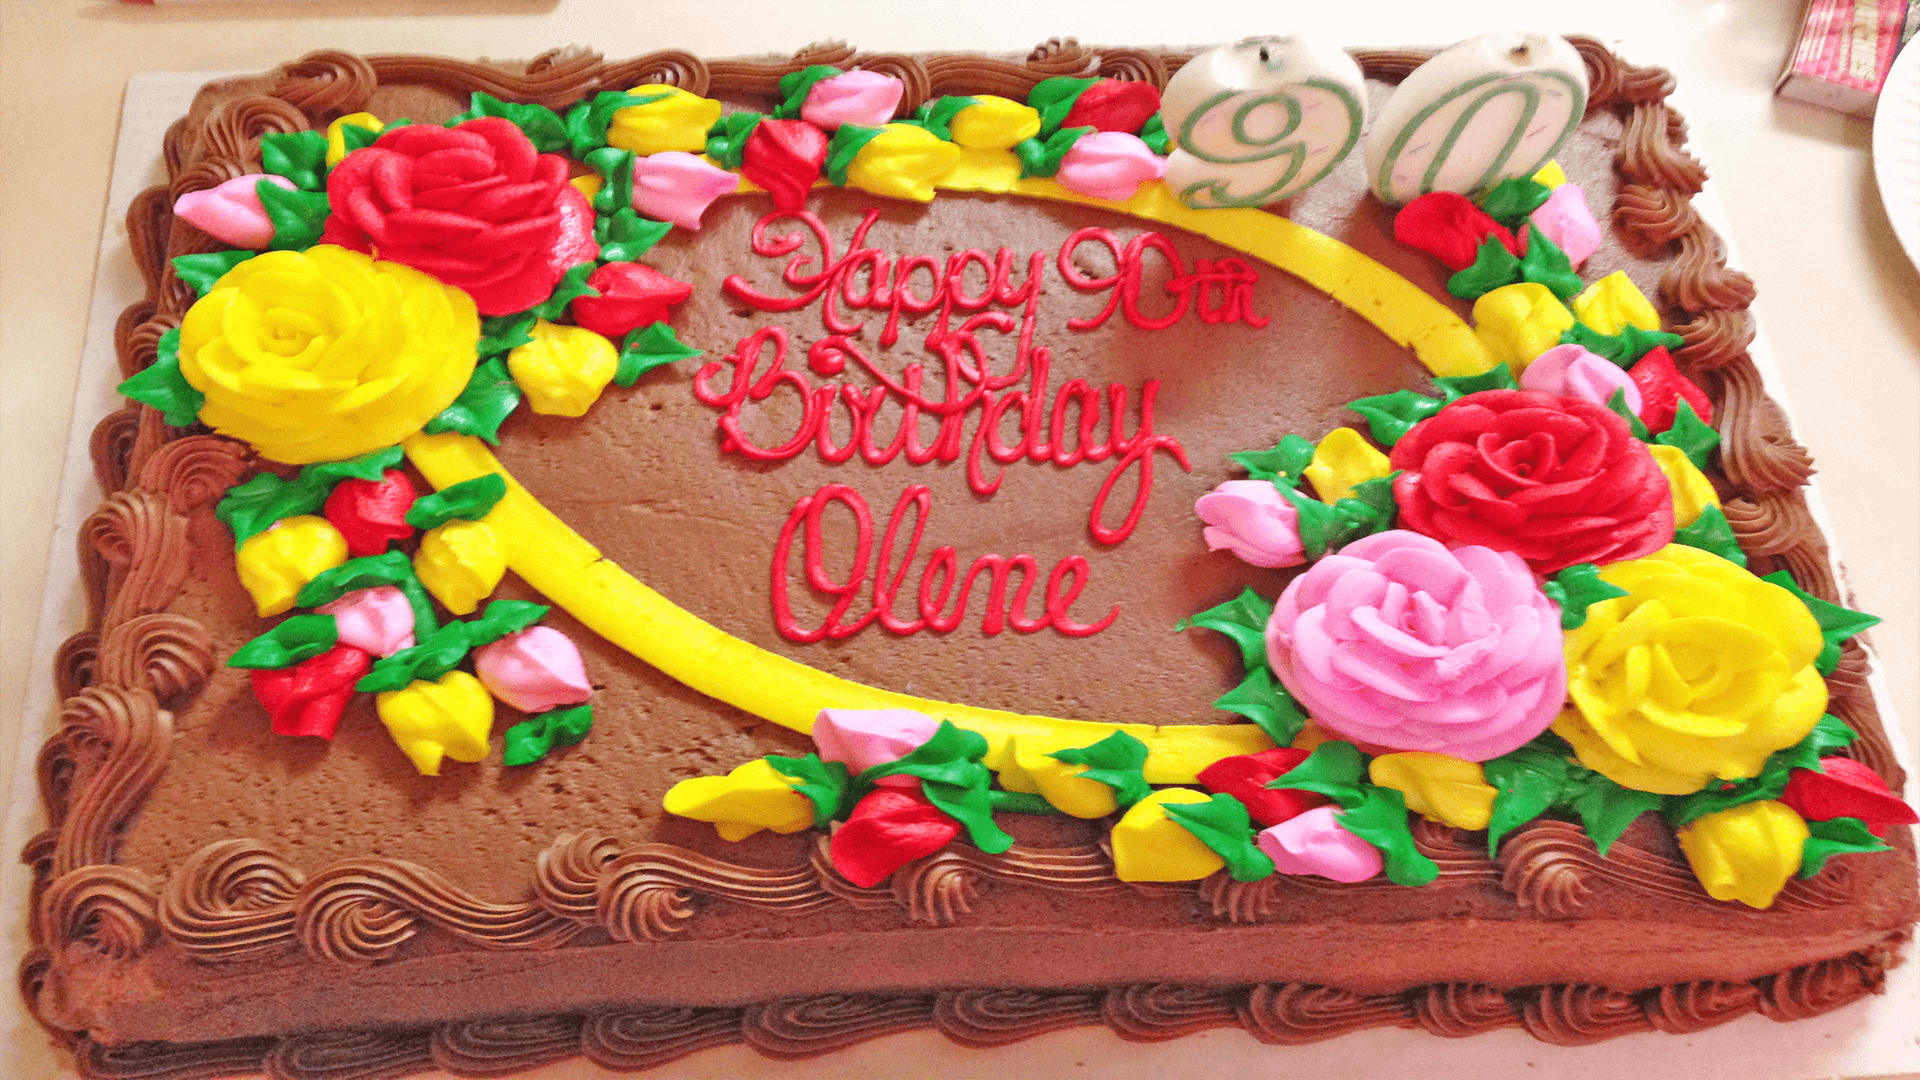 Birthday parties at Eden Adult Care Facility, retirement community homes in the Phoenix east valley area with homes in Gilbert and Mesa Arizona.